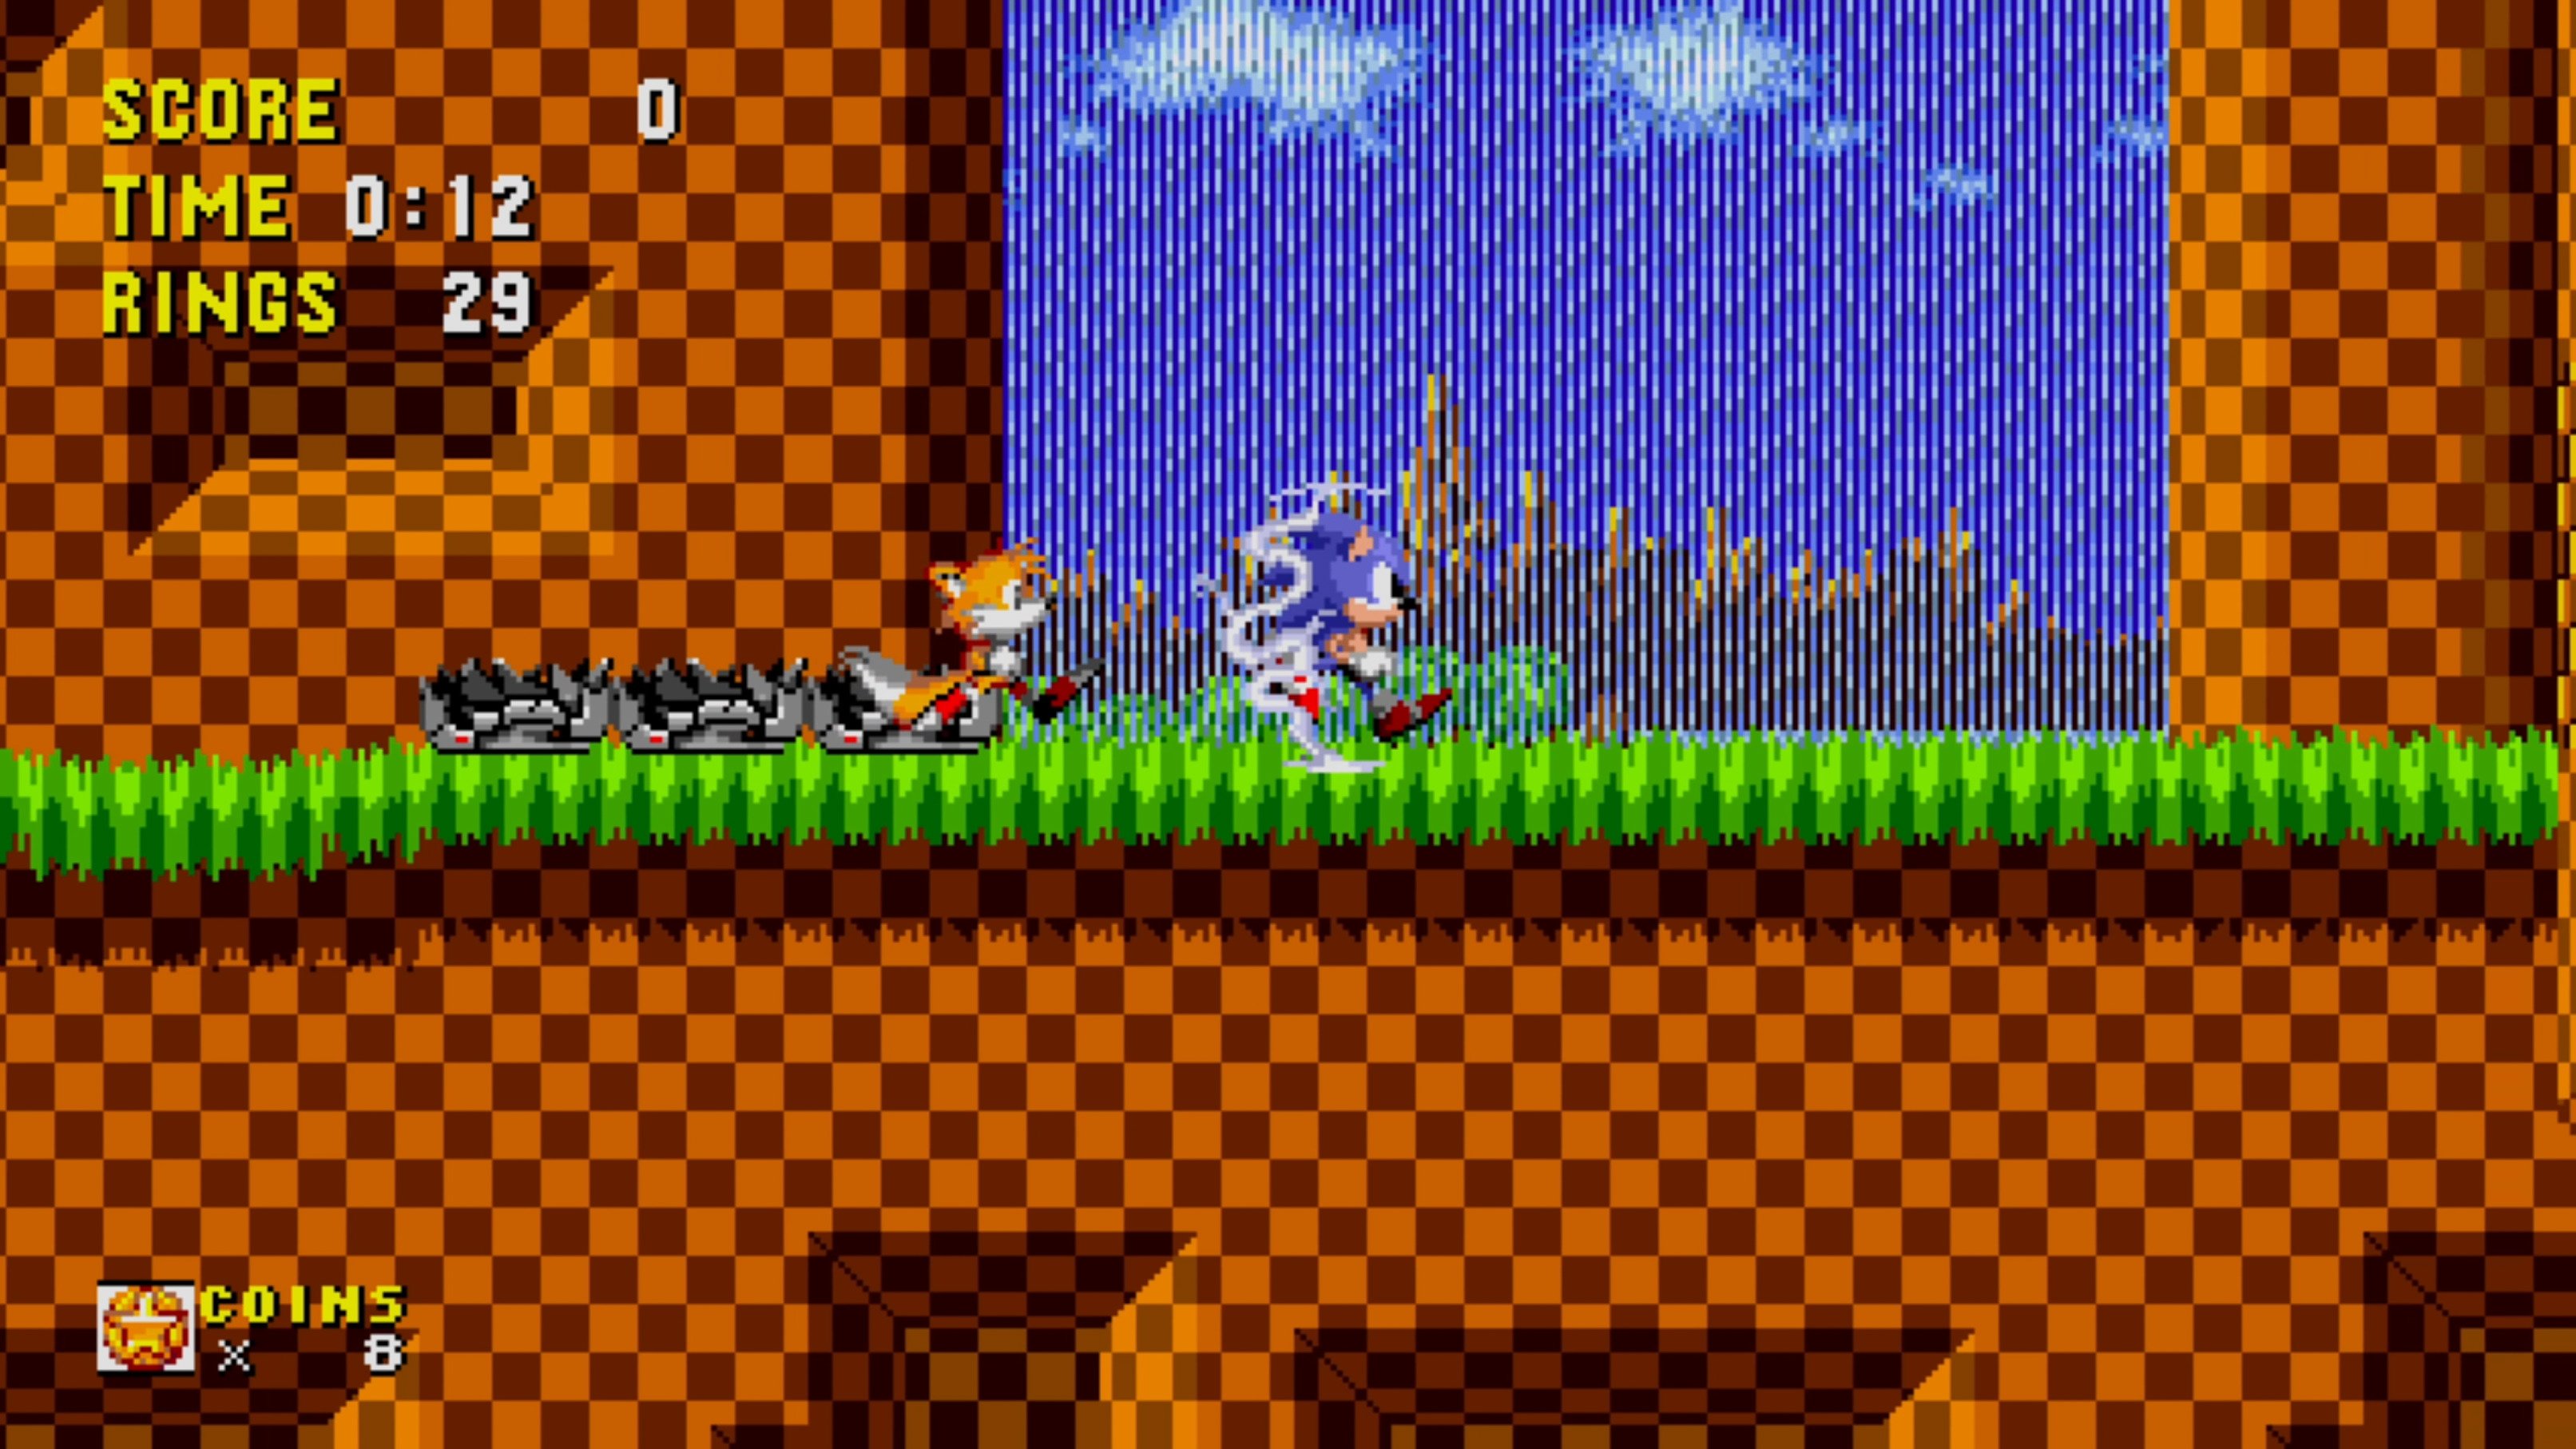 Go back to the start once again in Sonic Origins Plus